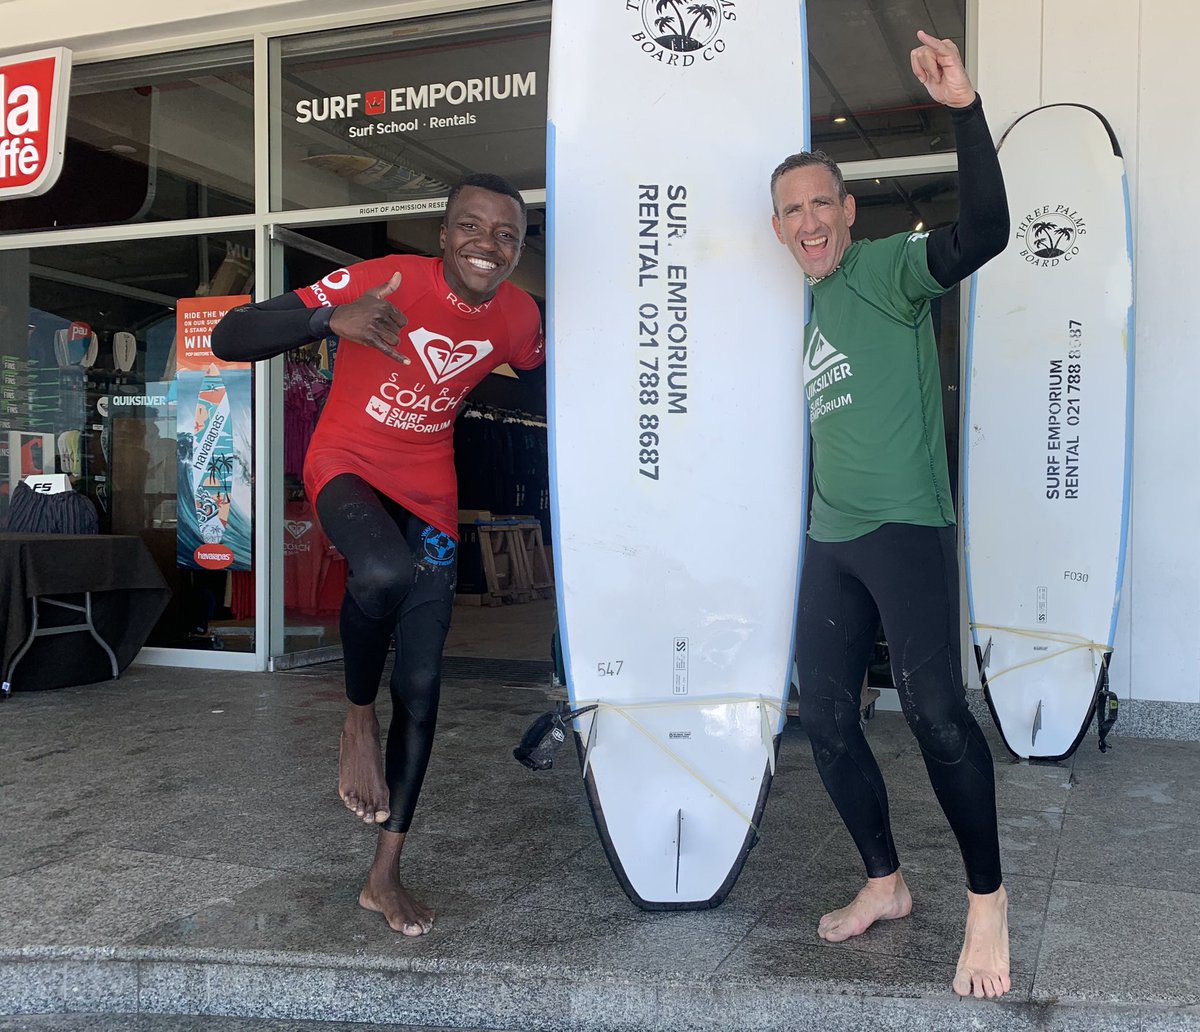 Surfing on Sunday with Coach V at Muizenberg : checked! ✅ The NGO @WavesforChange works w/ children from townships & provides mental-health services for under-resourced communities. They received the support of France and @AFD_en 🇿🇦⭐️🇫🇷🇪🇺 Support them as well!